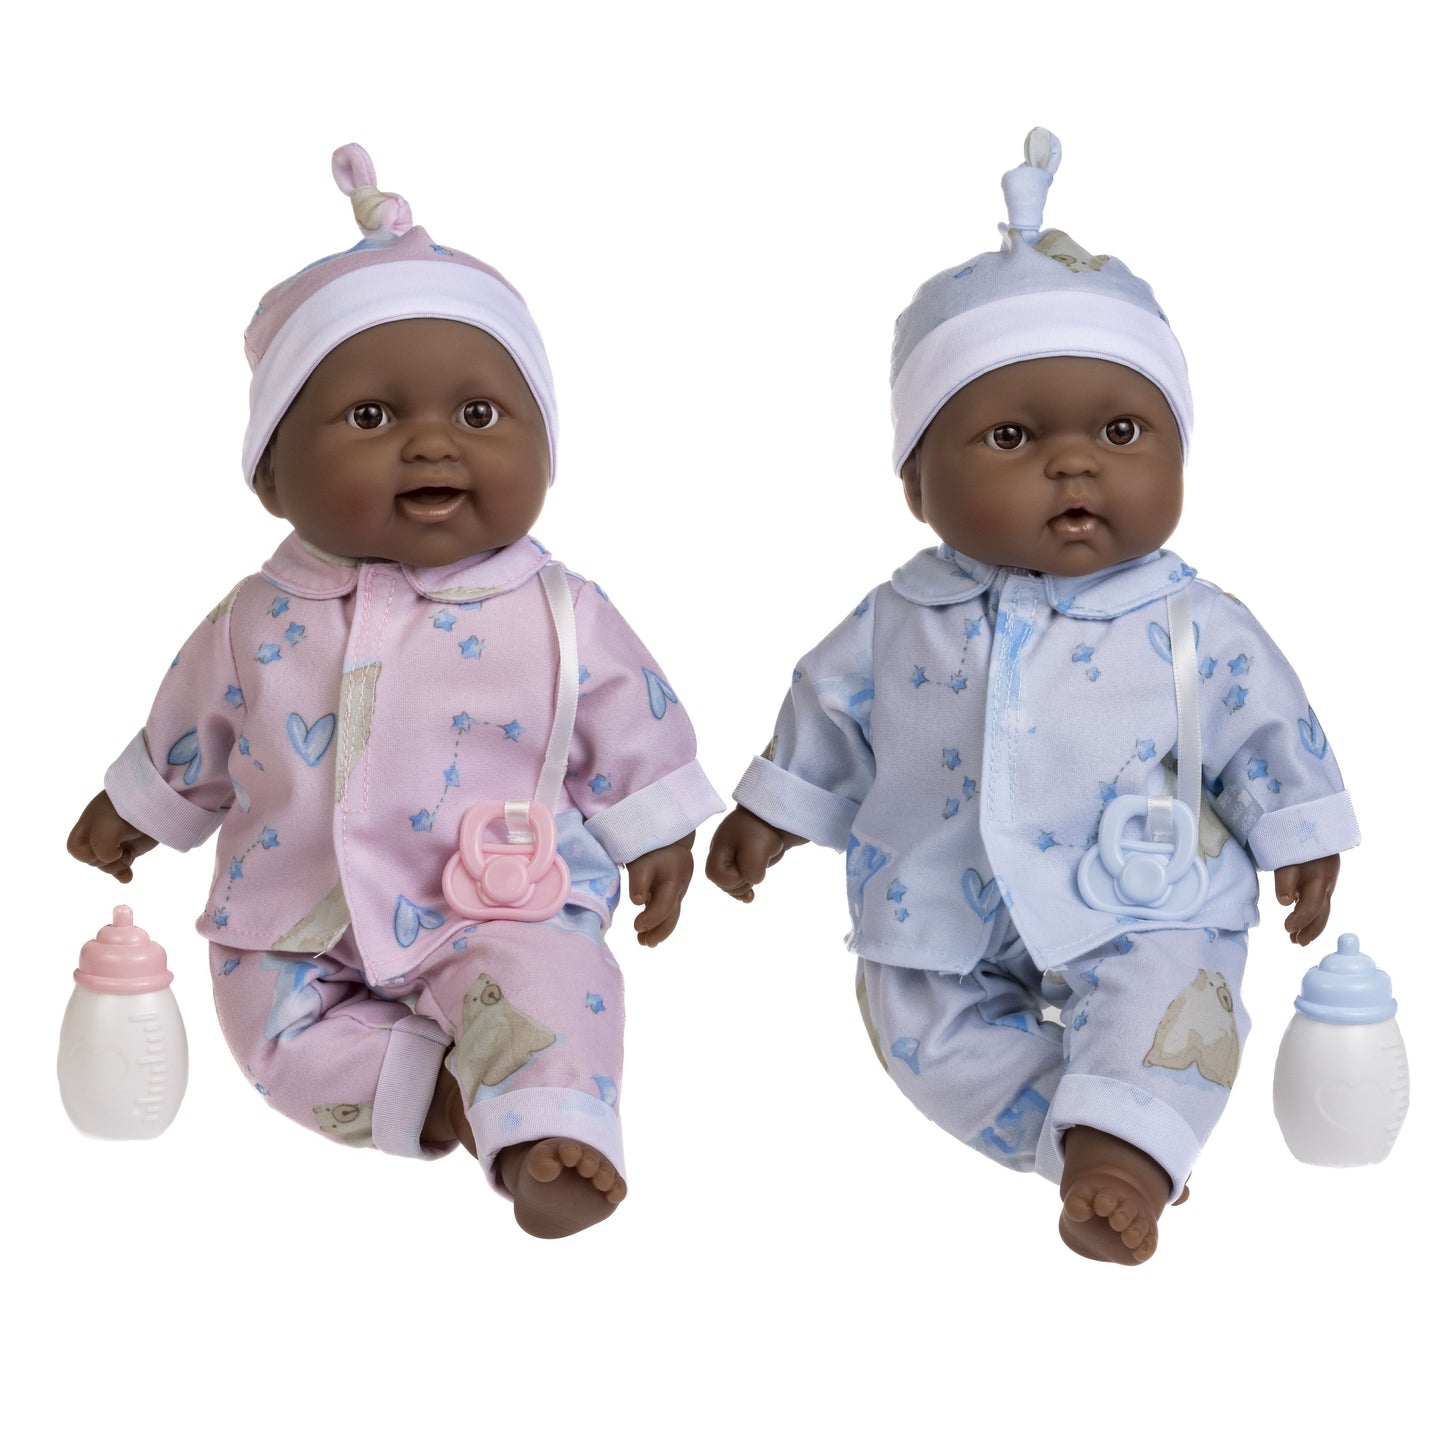 Lots to Cuddle Babies 13" Twins African American Soft Body Baby Dolls